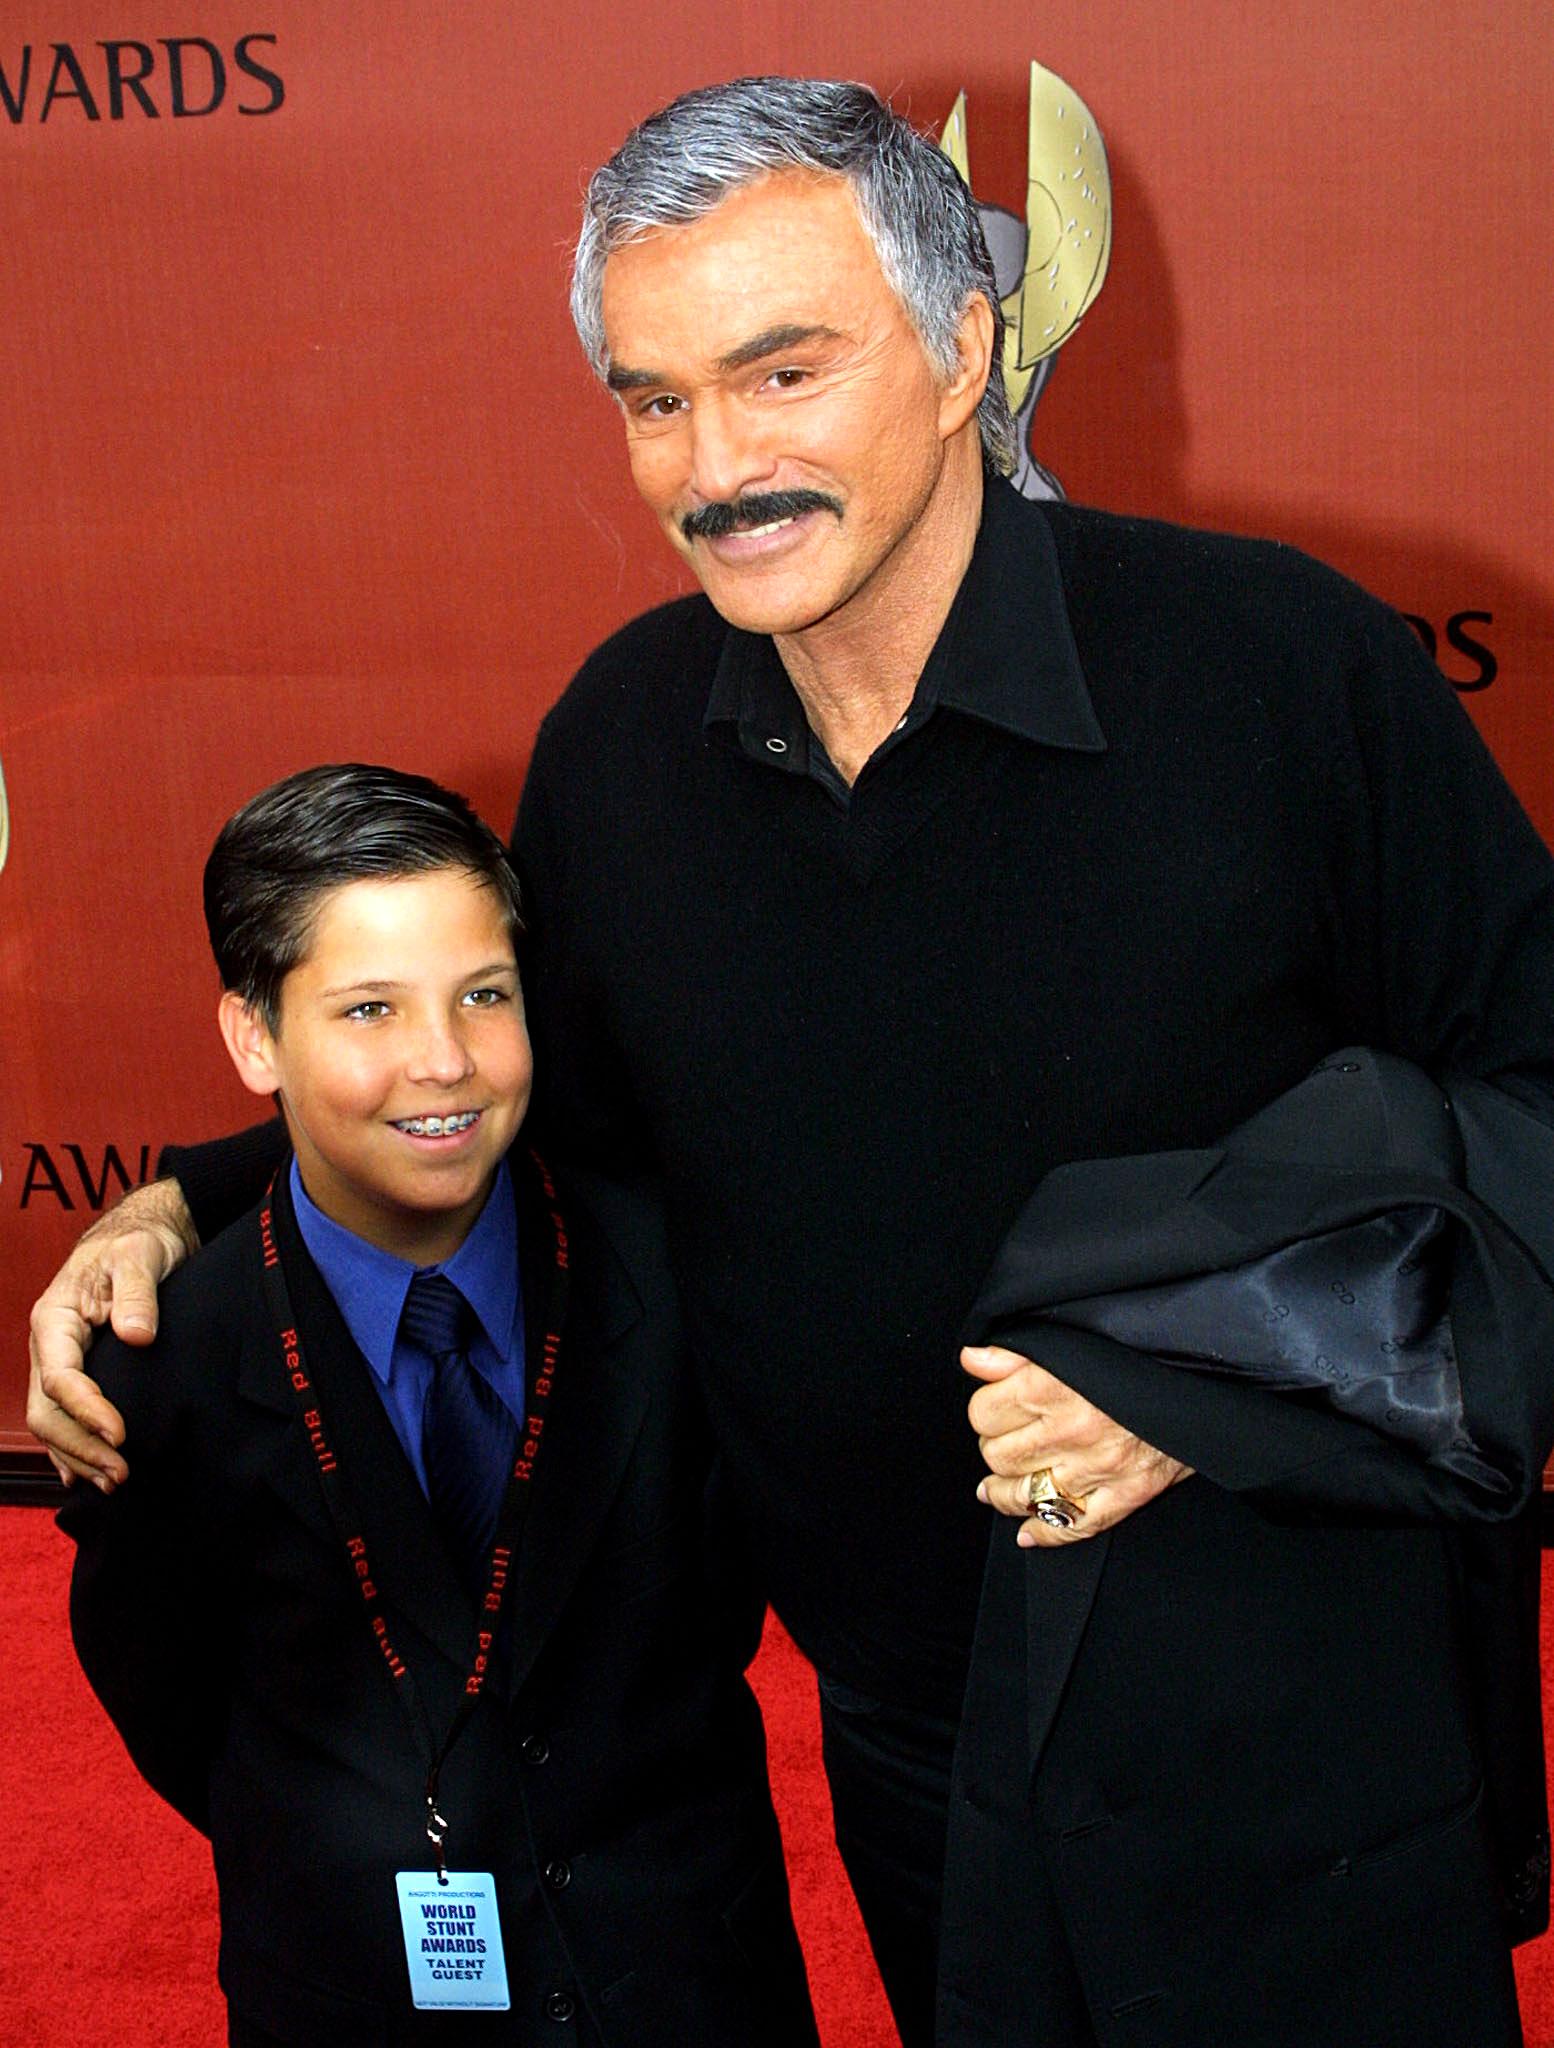 Burt Reynolds and his son Quinton arriving for the First International World Stunt Awards on 20 May, 2001 in Santa Monica, California. / Source: Getty Images